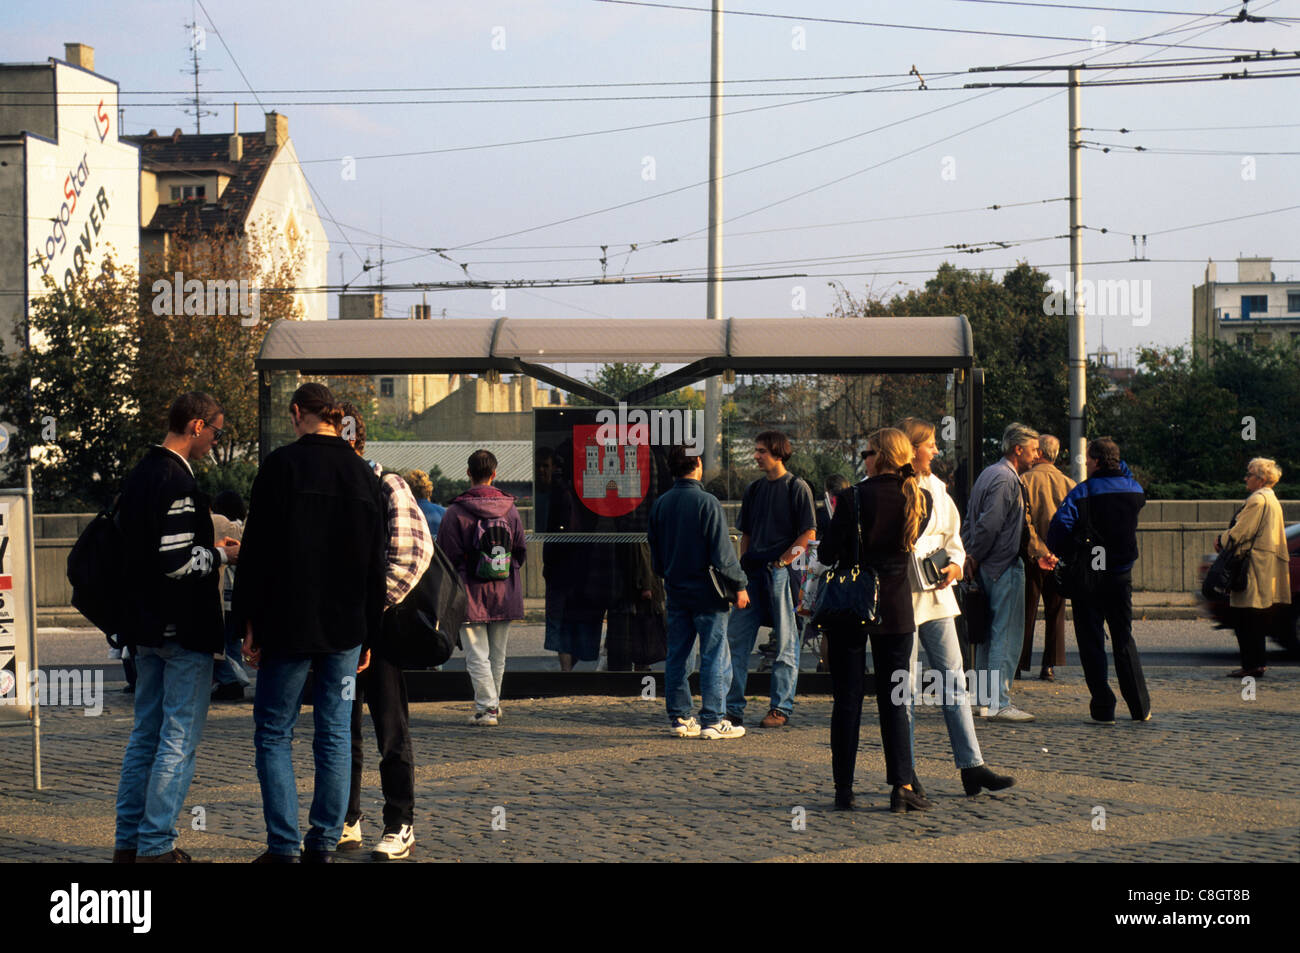 Bratislava, Slovakia: people at a trolley bus stop with the three tower castle motif of the city. Stock Photo